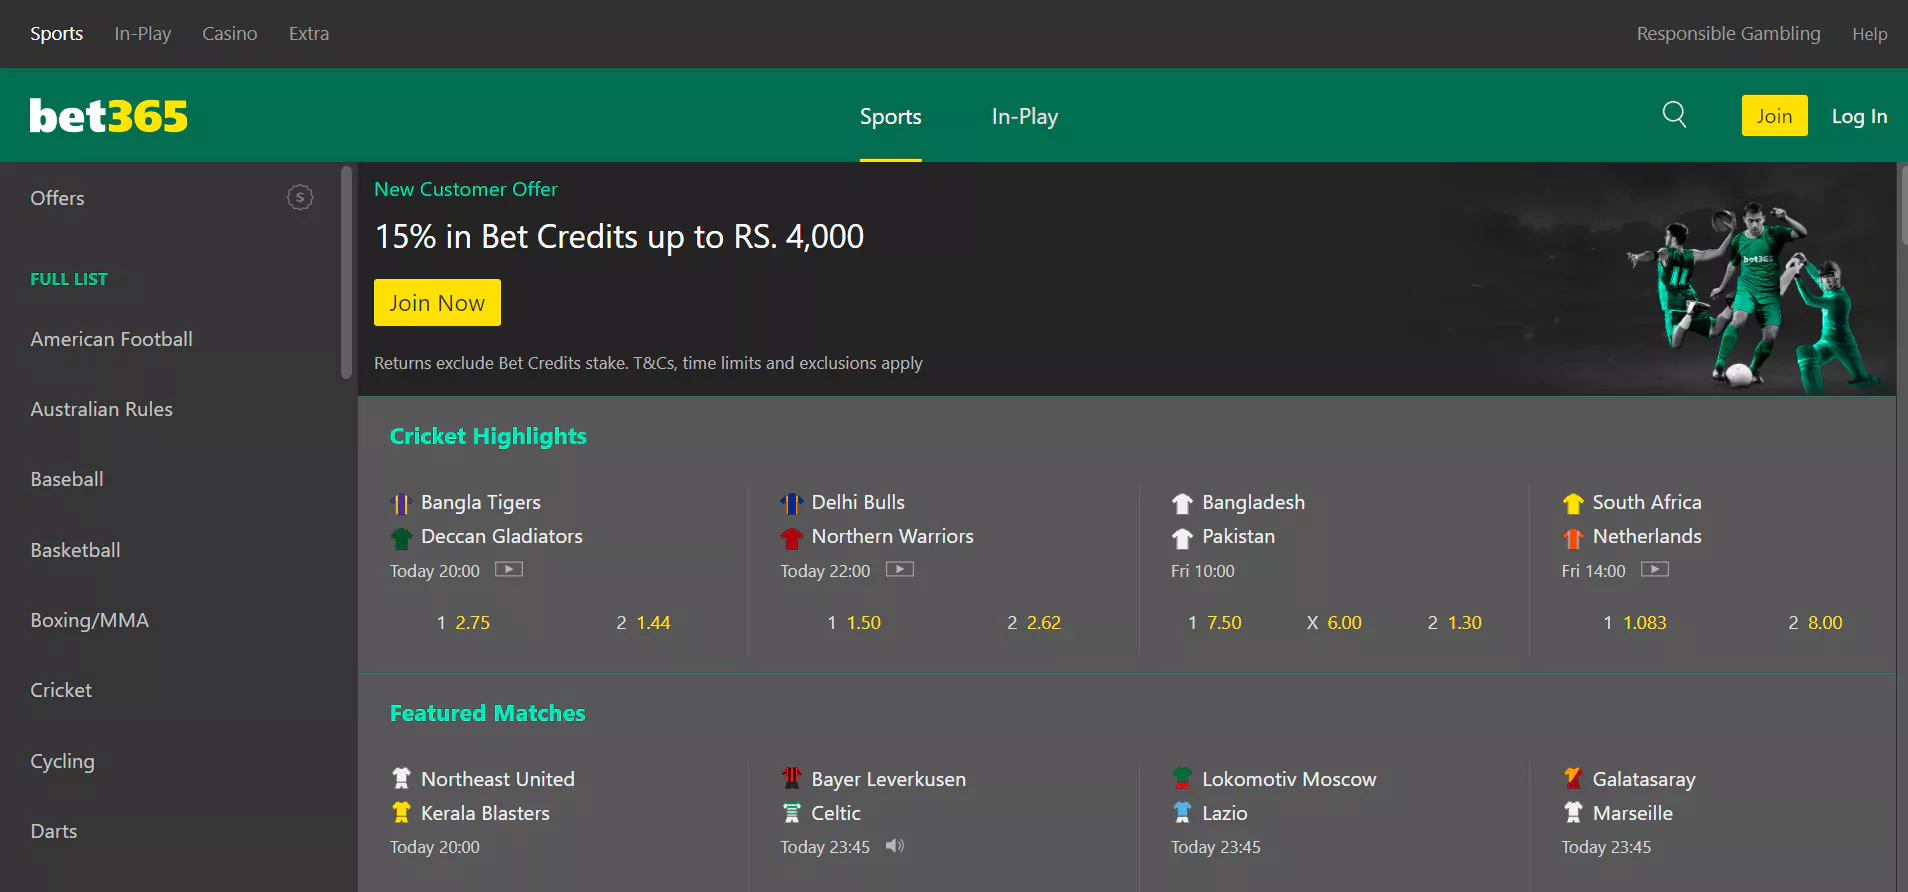 bet365 sports betting page